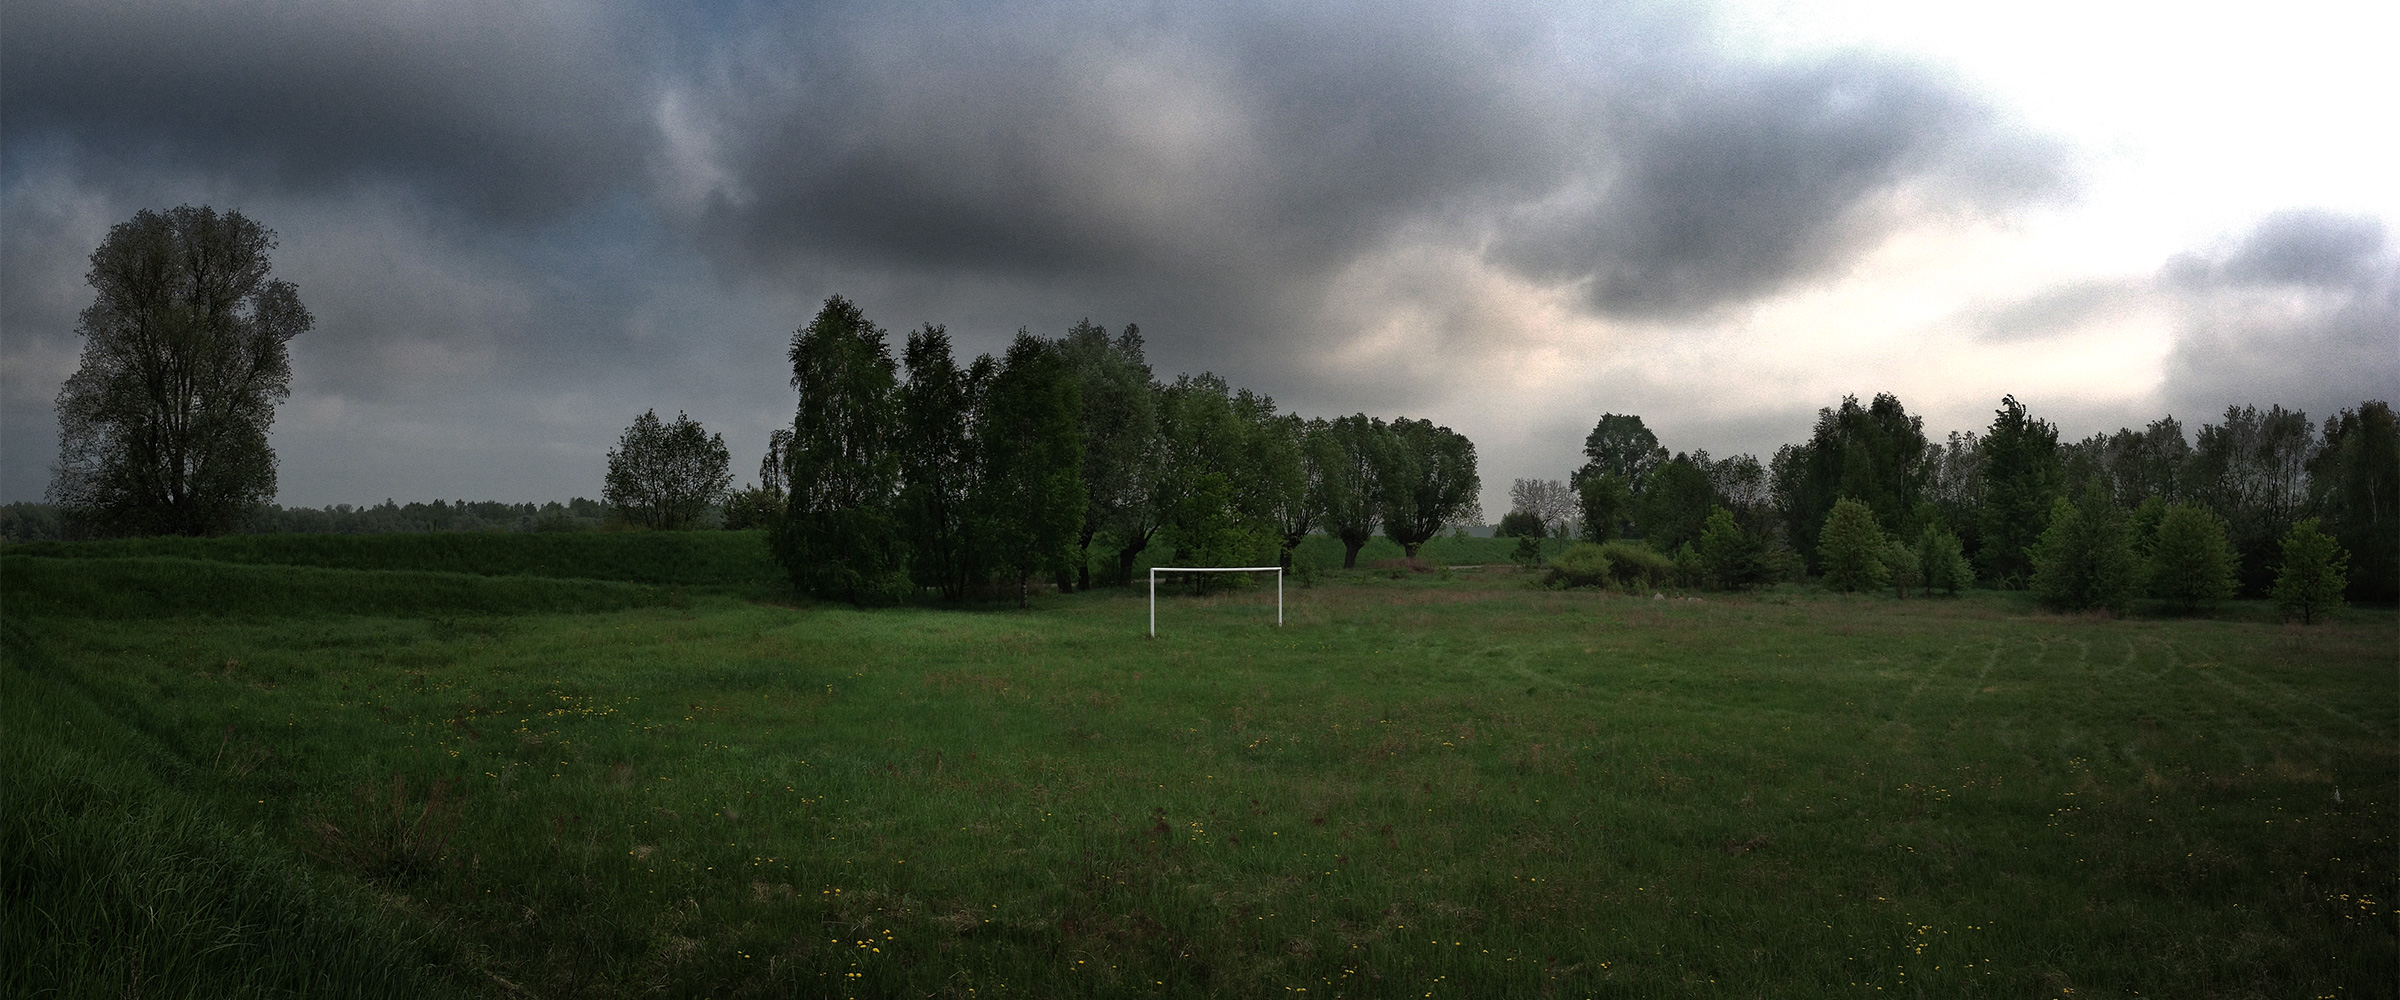 PANORAMA DIARY | Iphoneography blog | Picturesque side of sport